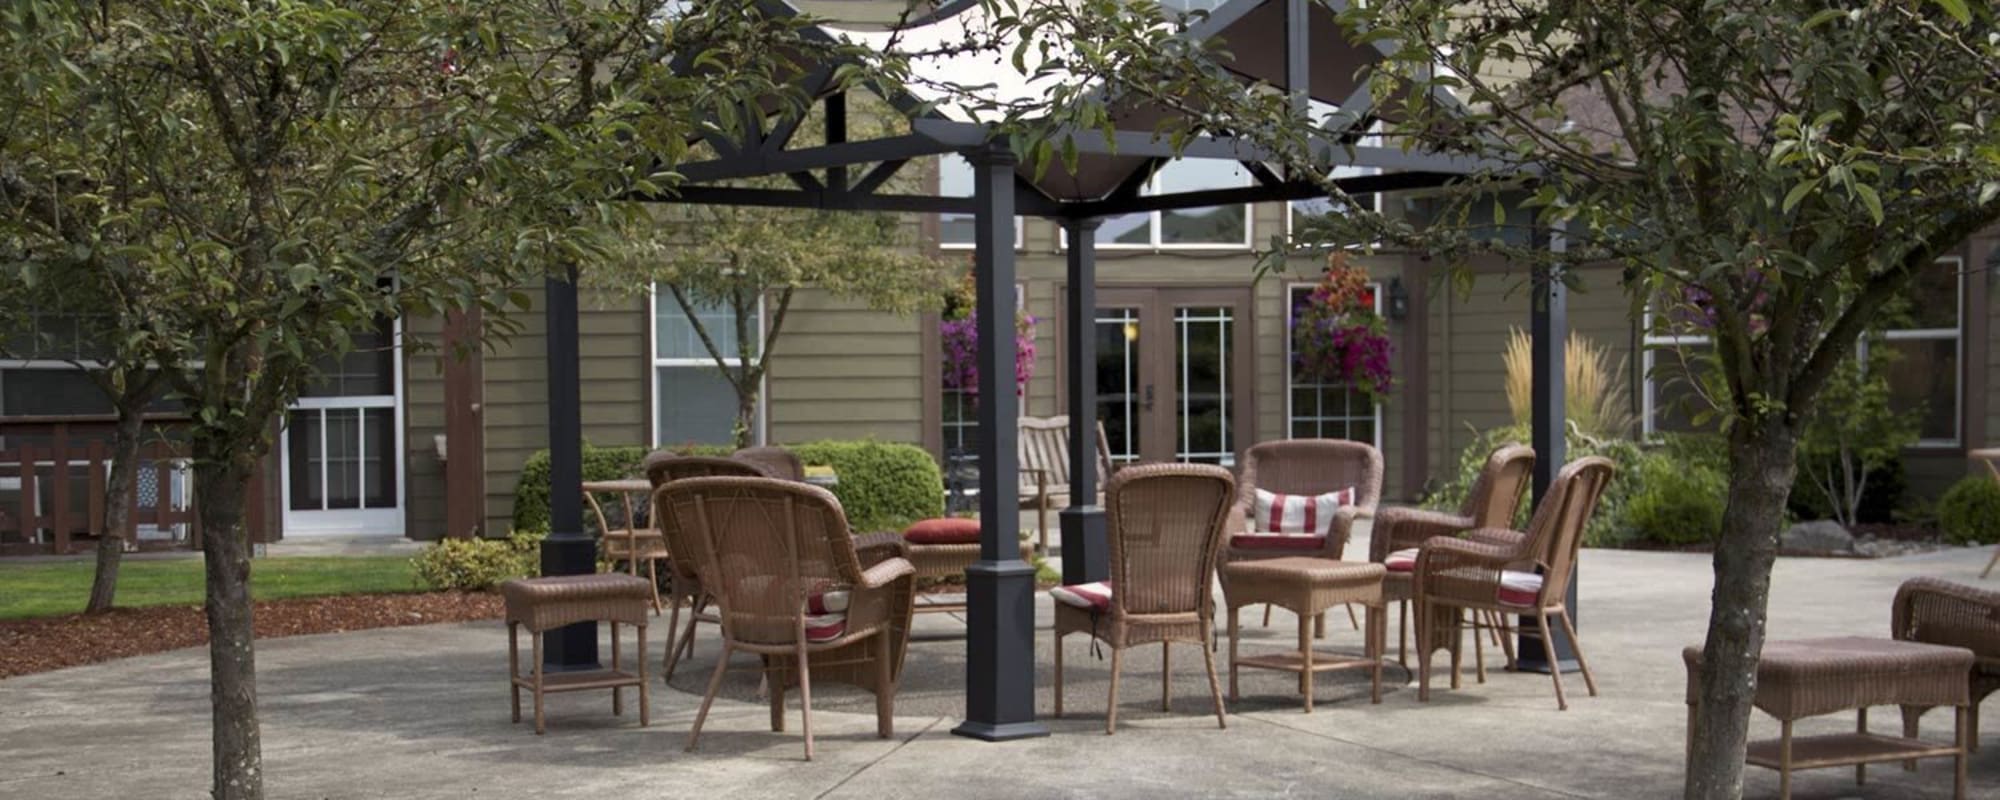 Patio seating outside on a sunny day complete with wicker furniture at The Springs at Sunnyview in Salem, Oregon